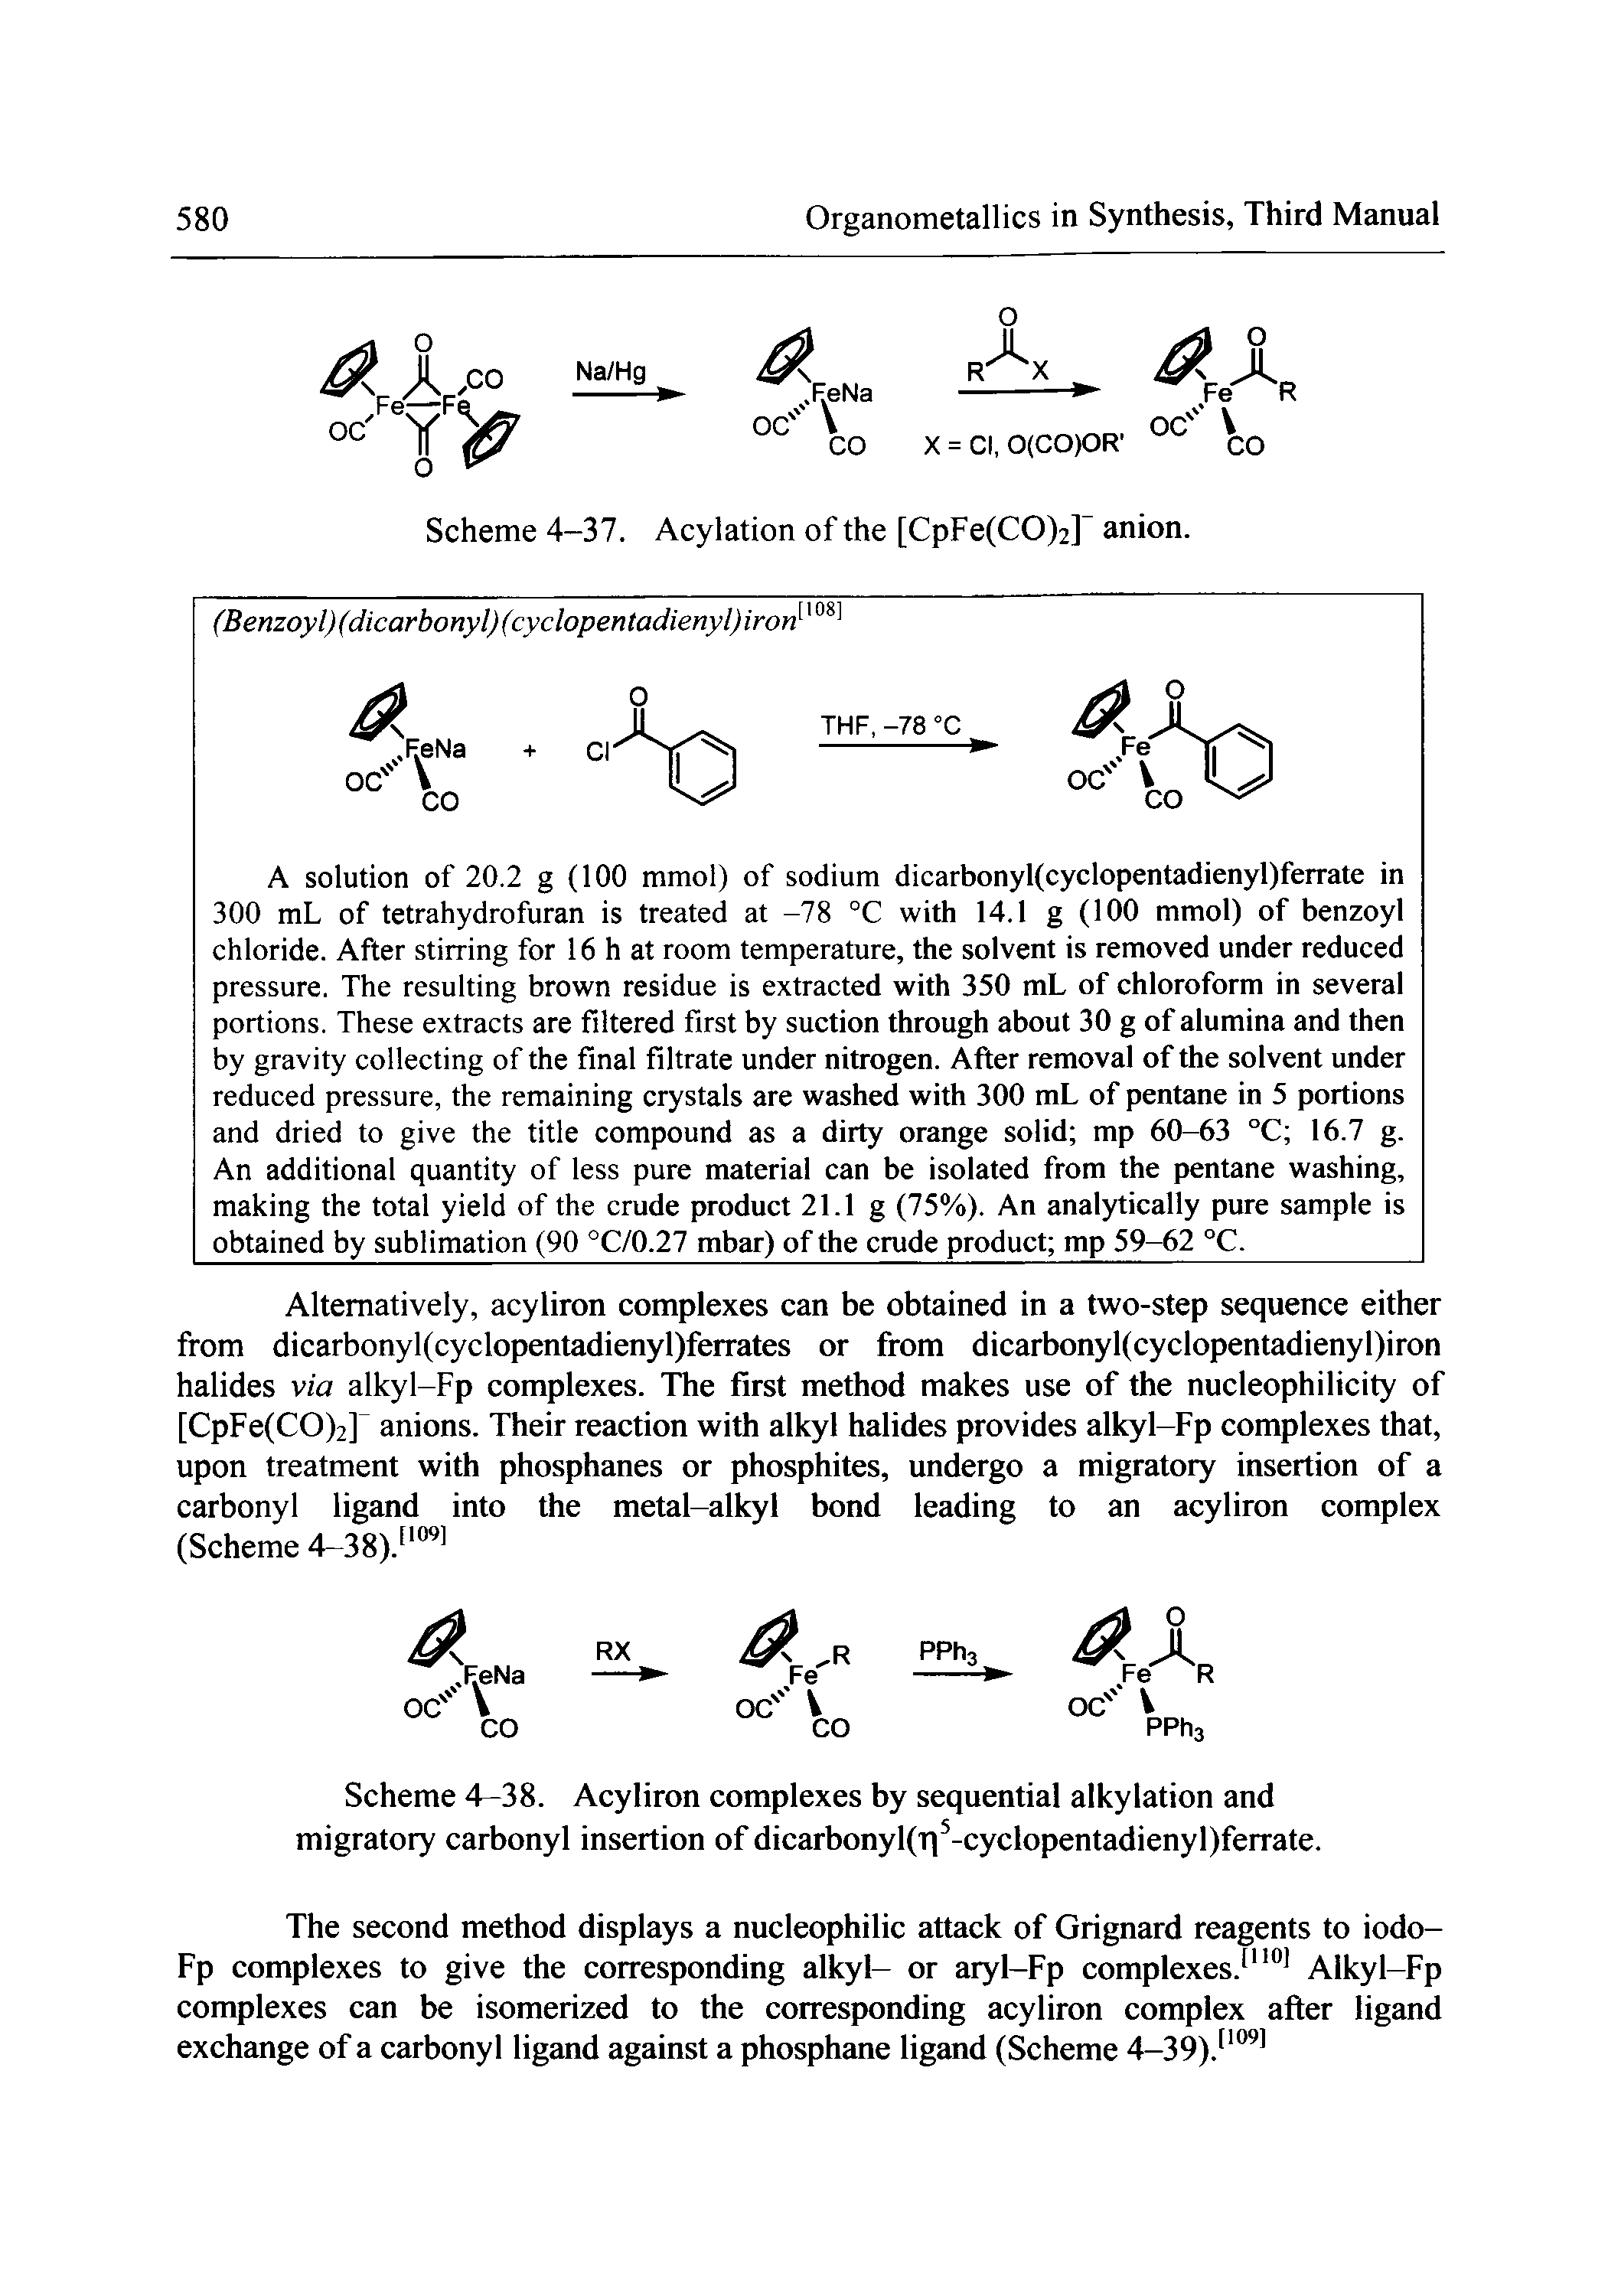 Scheme 4—38. Acyliron complexes by sequential alkylation and migratory carbonyl insertion of dicarbonyl(t -cyclopentadienyl)ferrate.